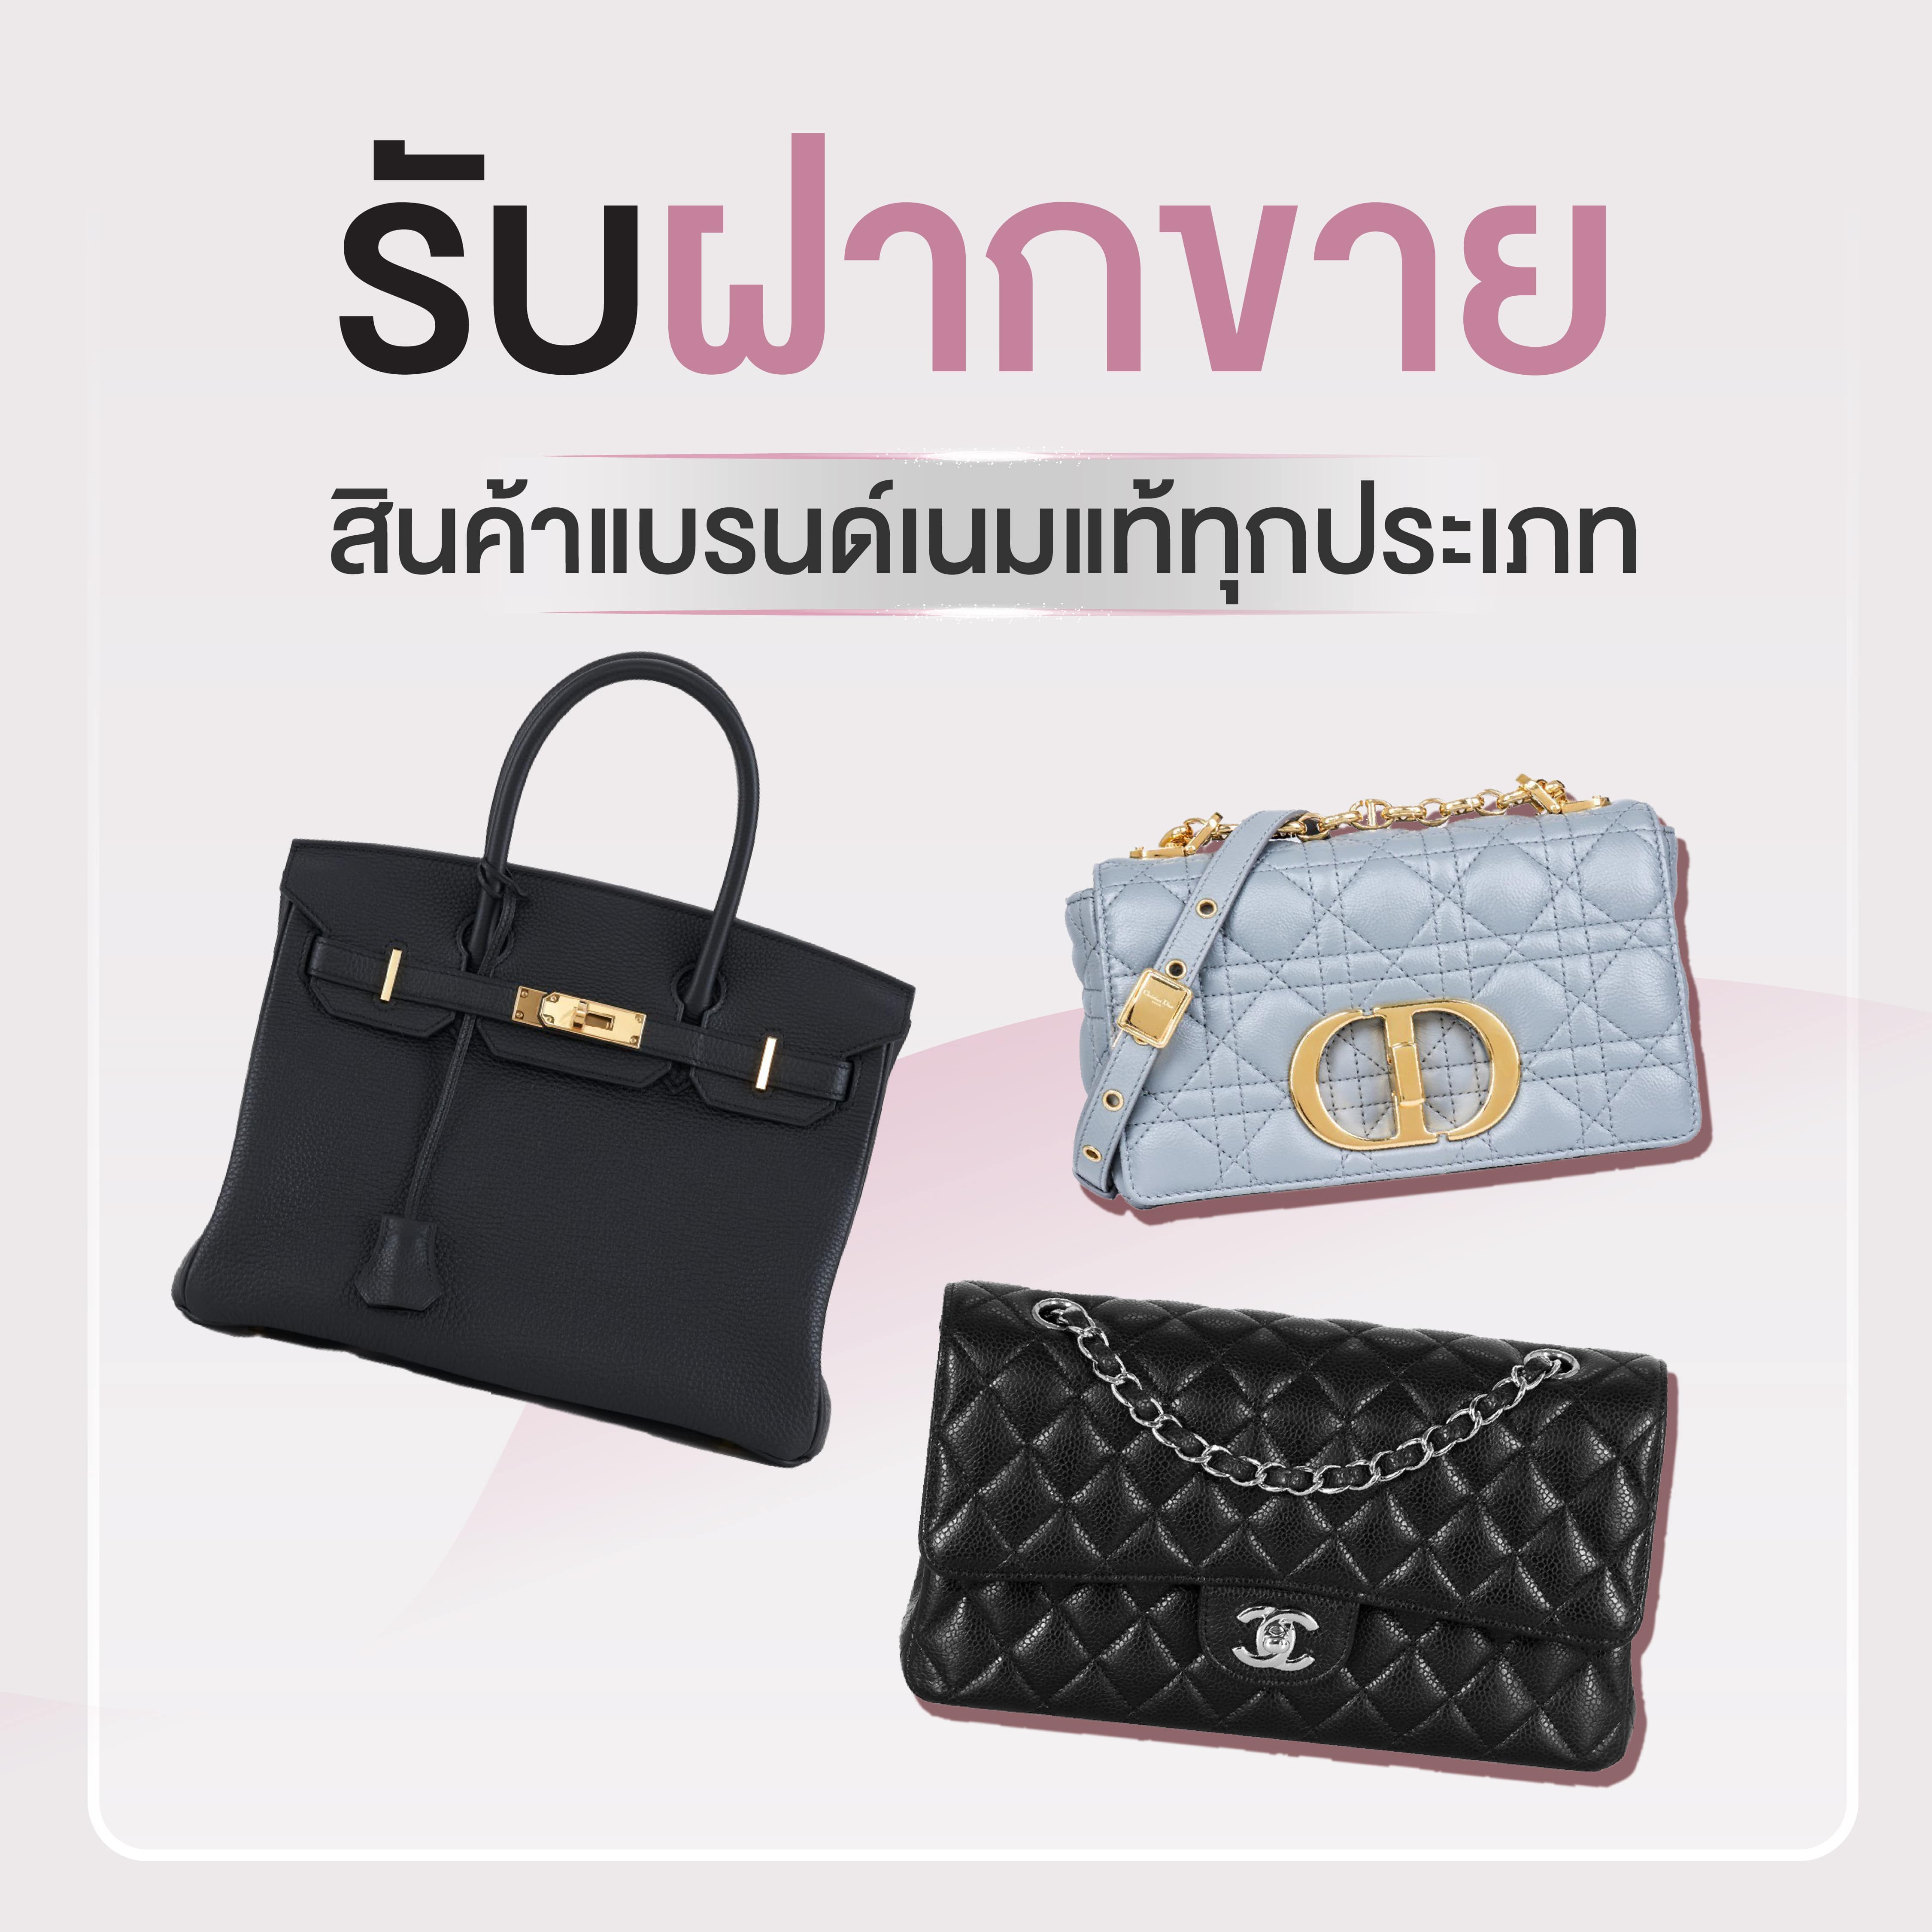 Sell your brandname bags with the best price that we can offer with SF Brandname.